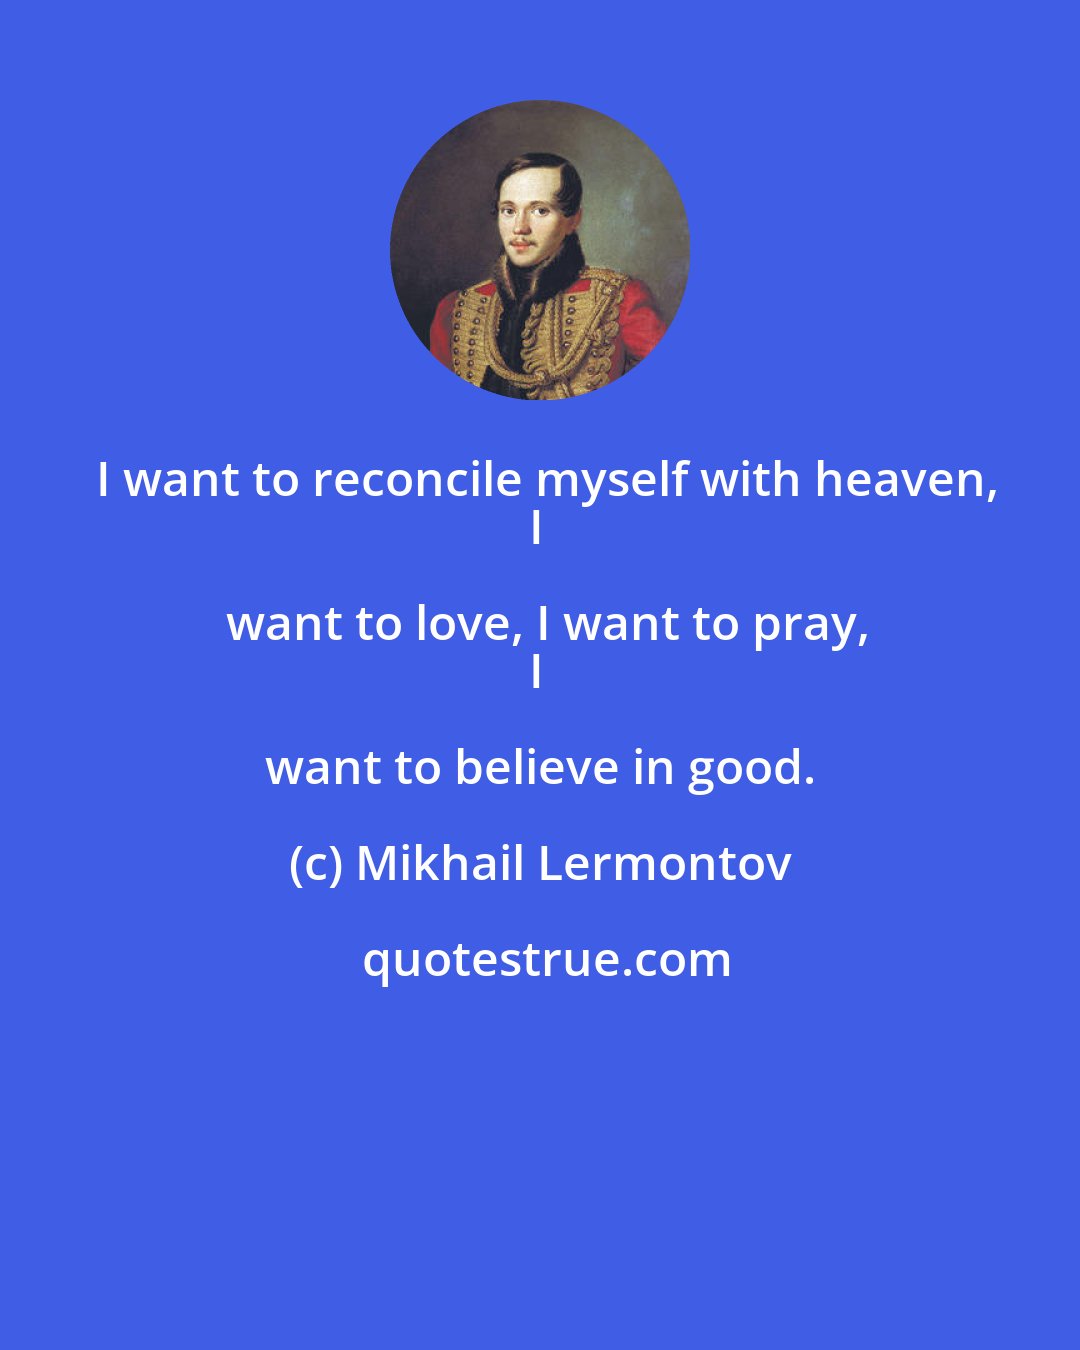 Mikhail Lermontov: I want to reconcile myself with heaven,
I want to love, I want to pray,
I want to believe in good.